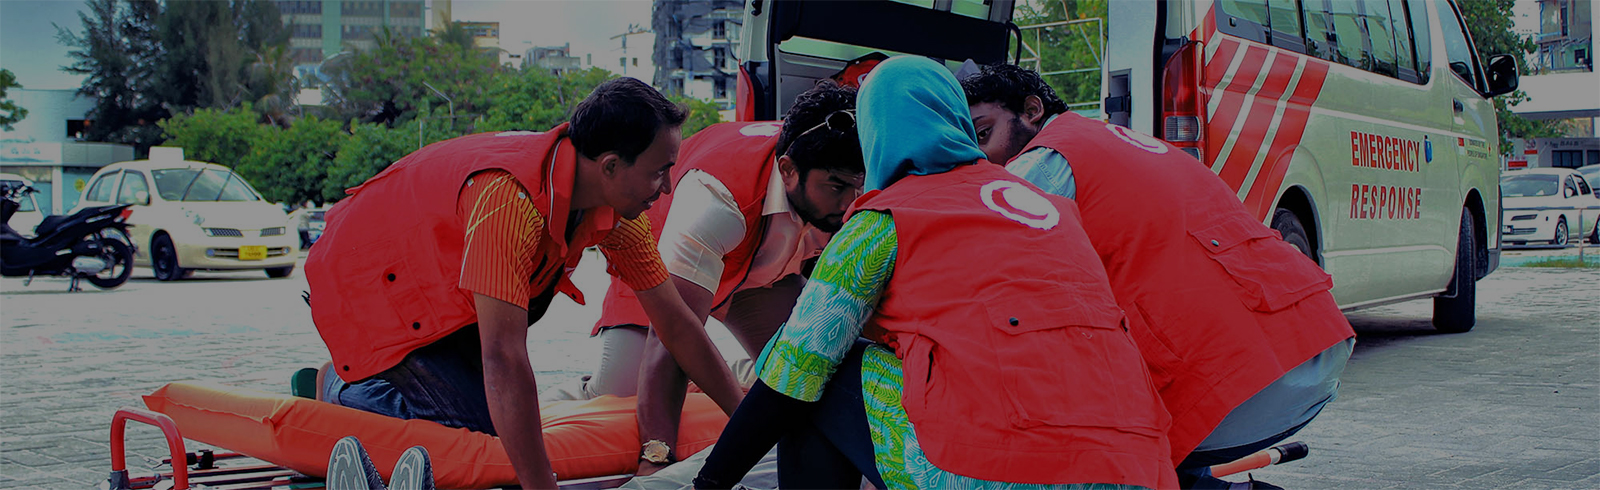 An image of red crescent volunteers assisting an injured person on a stretcher near a red crescent ambulance